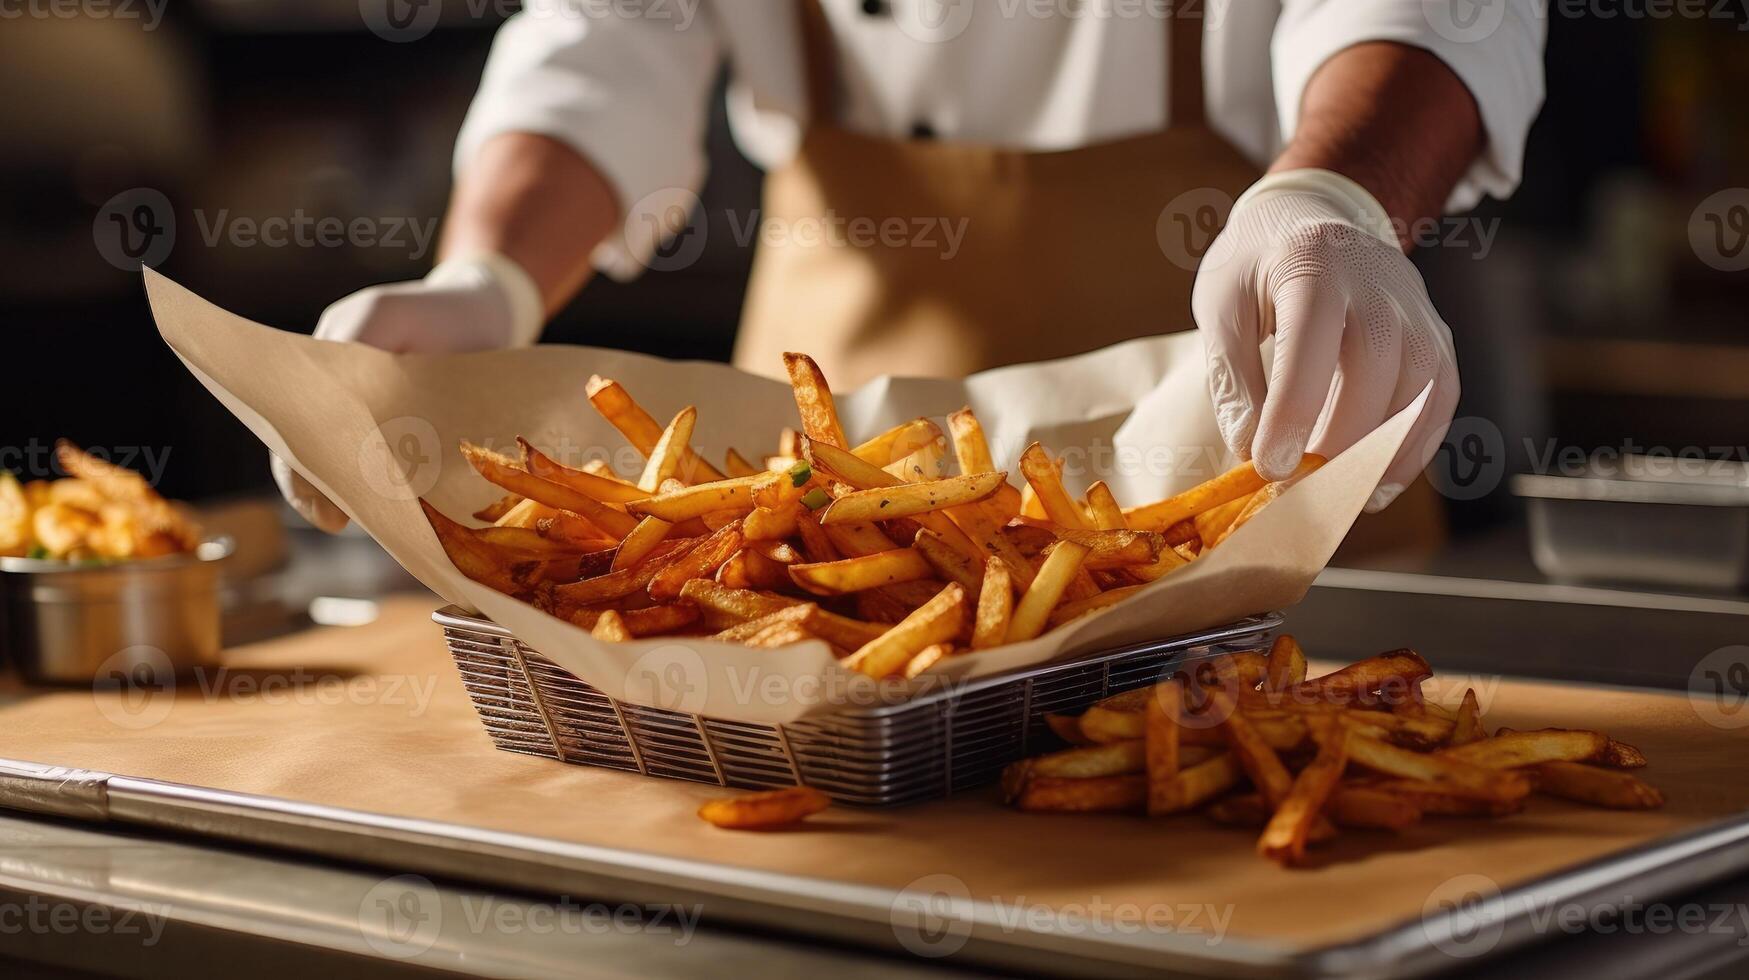 AI generated chef takes out delicious french fries from the frye, photo